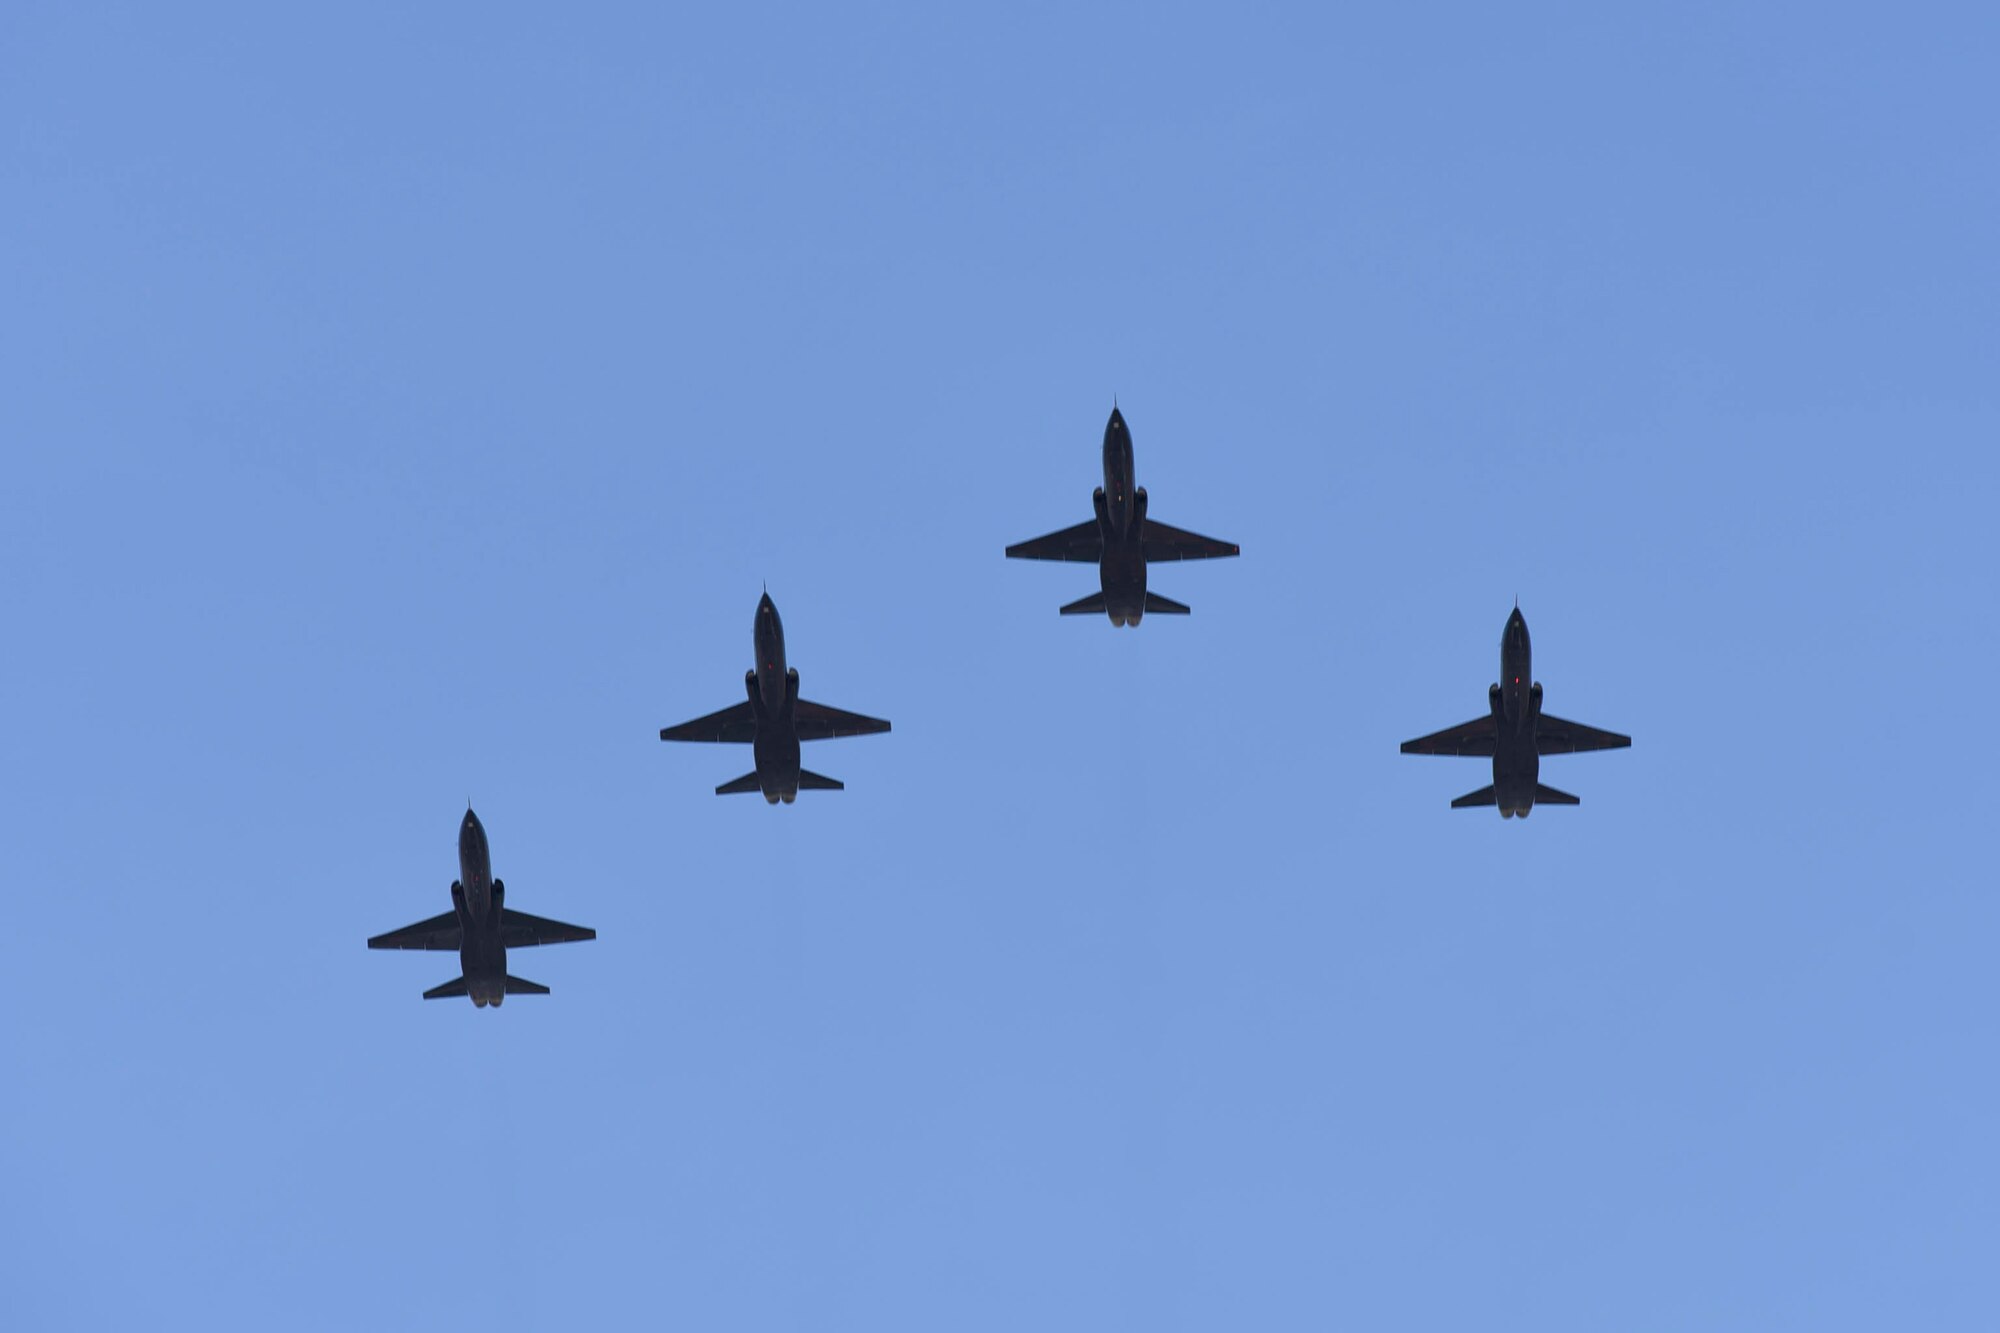 U.S. Air Force T-38A Talons assigned to the 9th Reconnaissance Wing at Beale Air Force Base, California, fly over David Grant USAF Medical Center during an Operation American Resolve flyover May 9, 2020, at Travis Air Force Base, California. The flyover saluted healthcare workers and first responders in Northern California cities impacted by COVID-19. (U.S. Air Force photo by Airman 1st Class Cameron Otte)